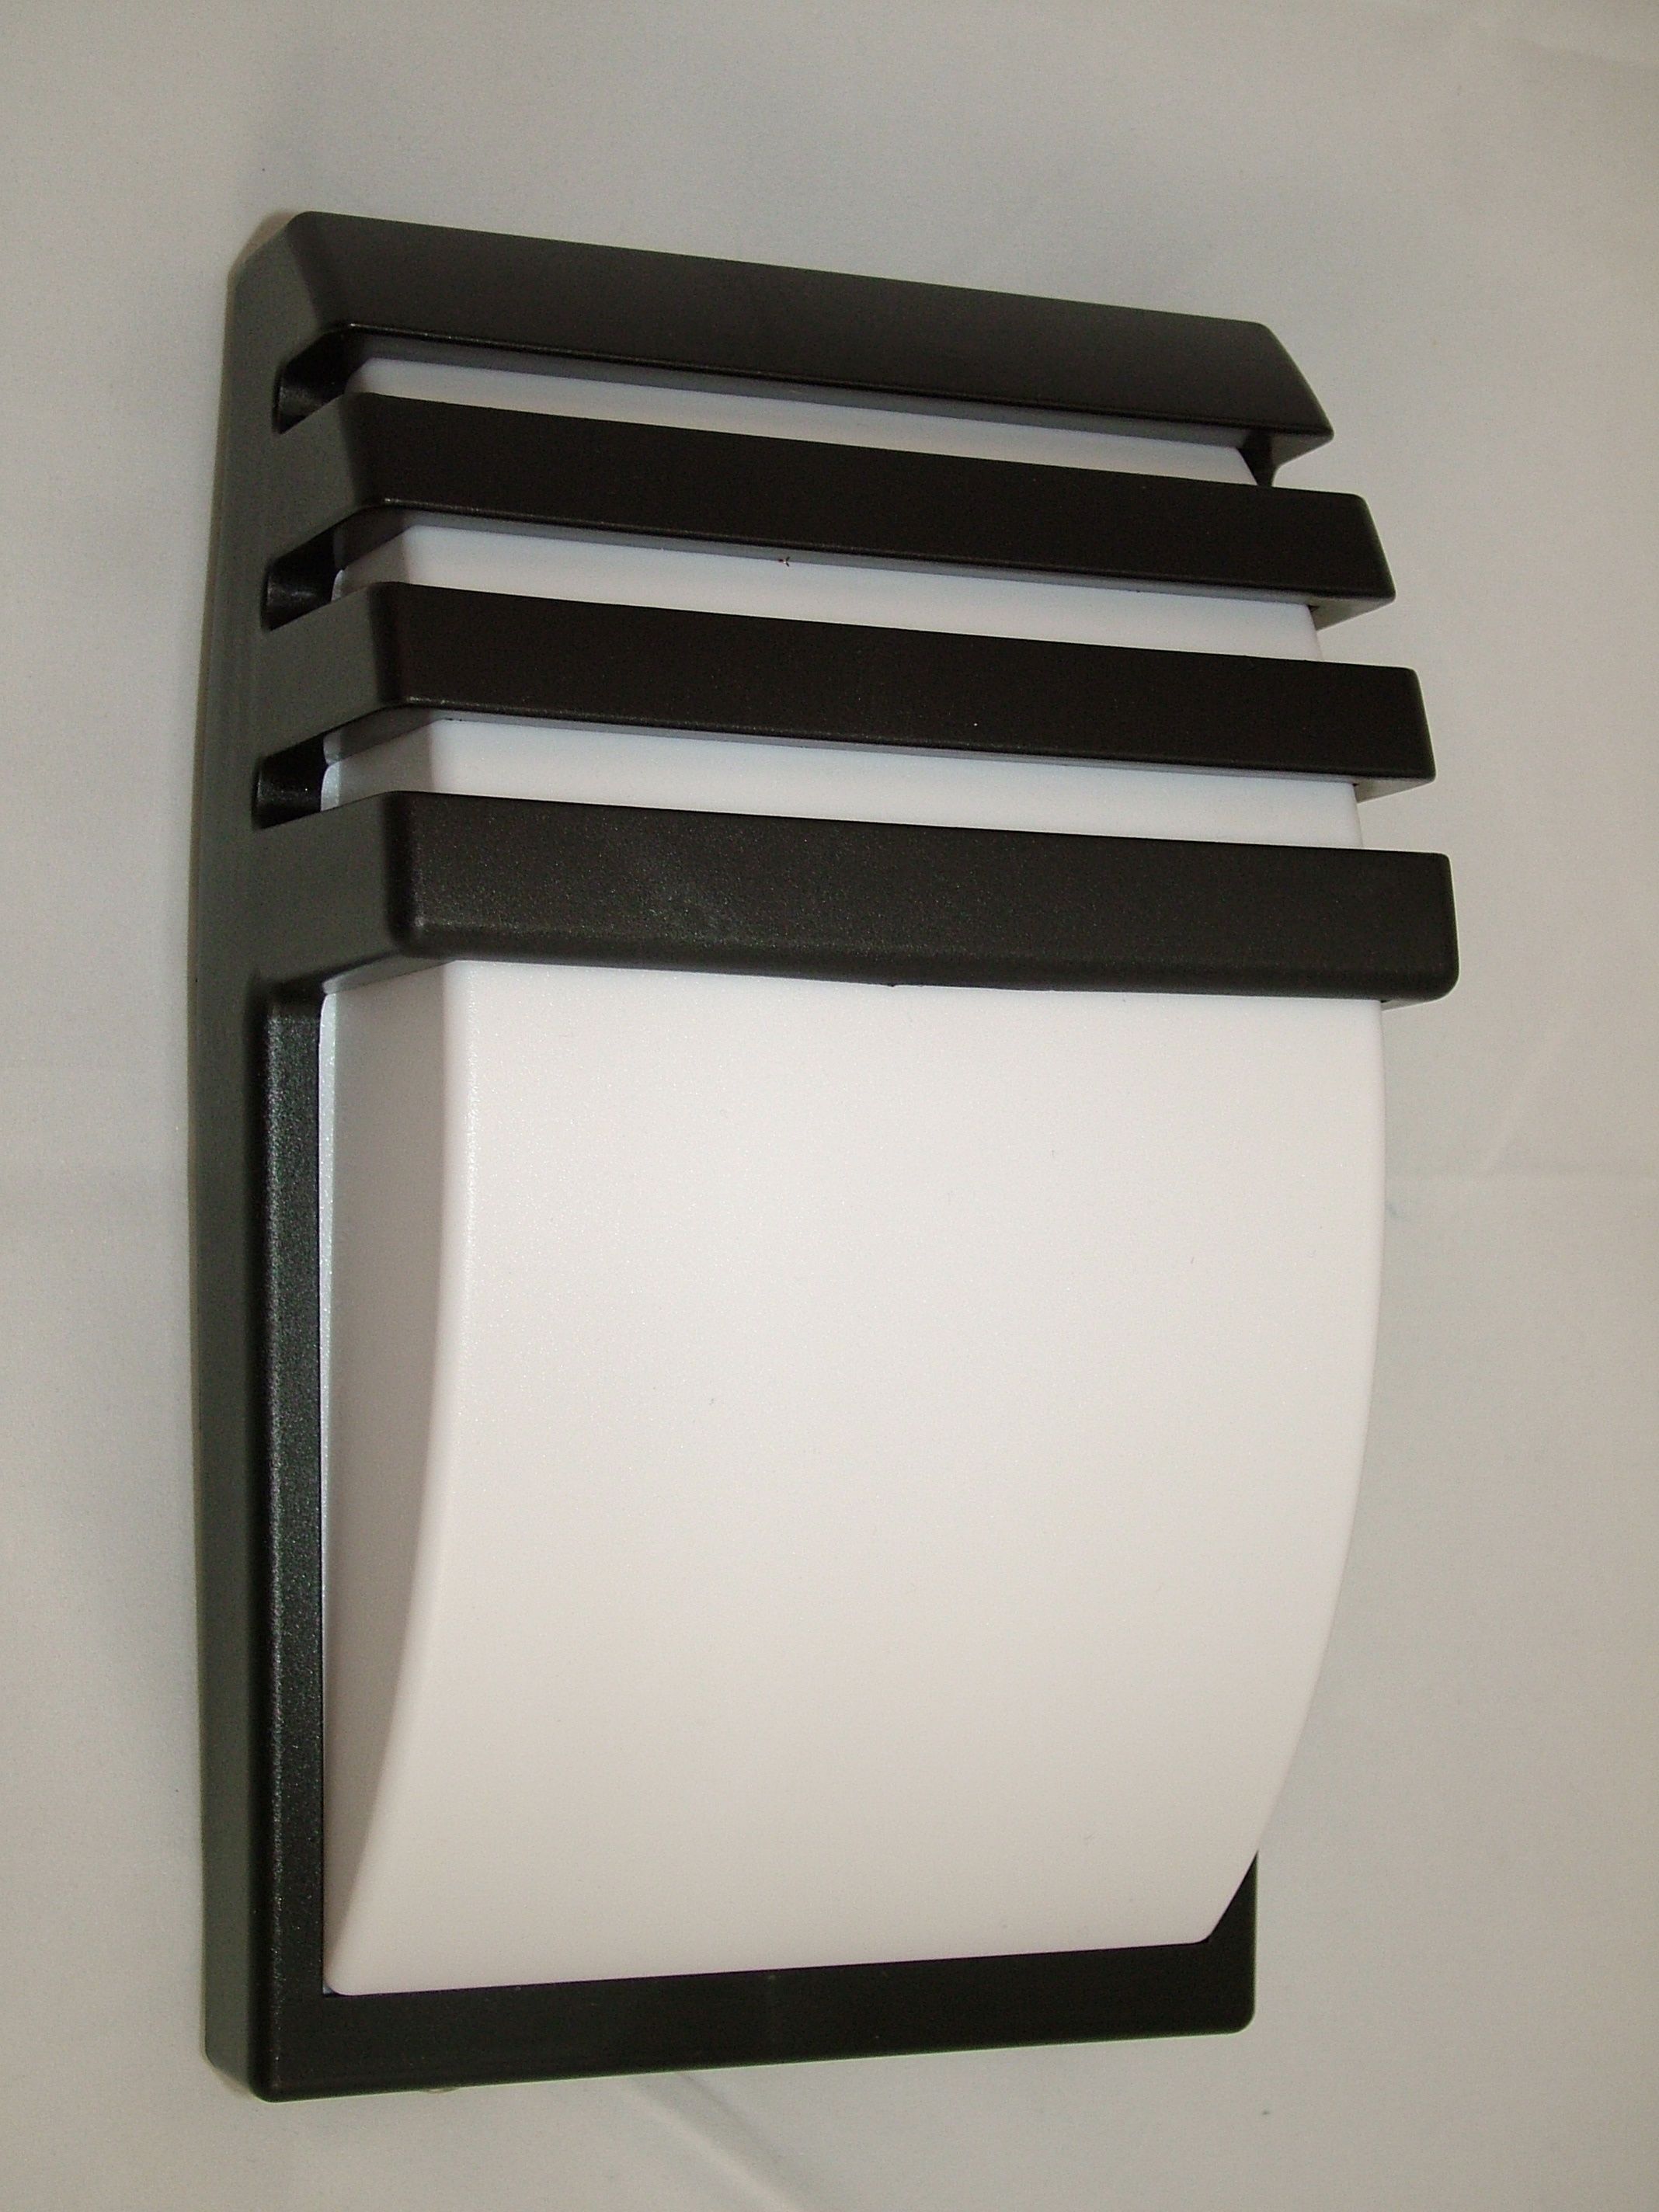 Large Outdoor Modern Wall Mounted Lighting Fixtures With Black In Outdoor Wall Mount Lighting Fixtures (View 8 of 15)